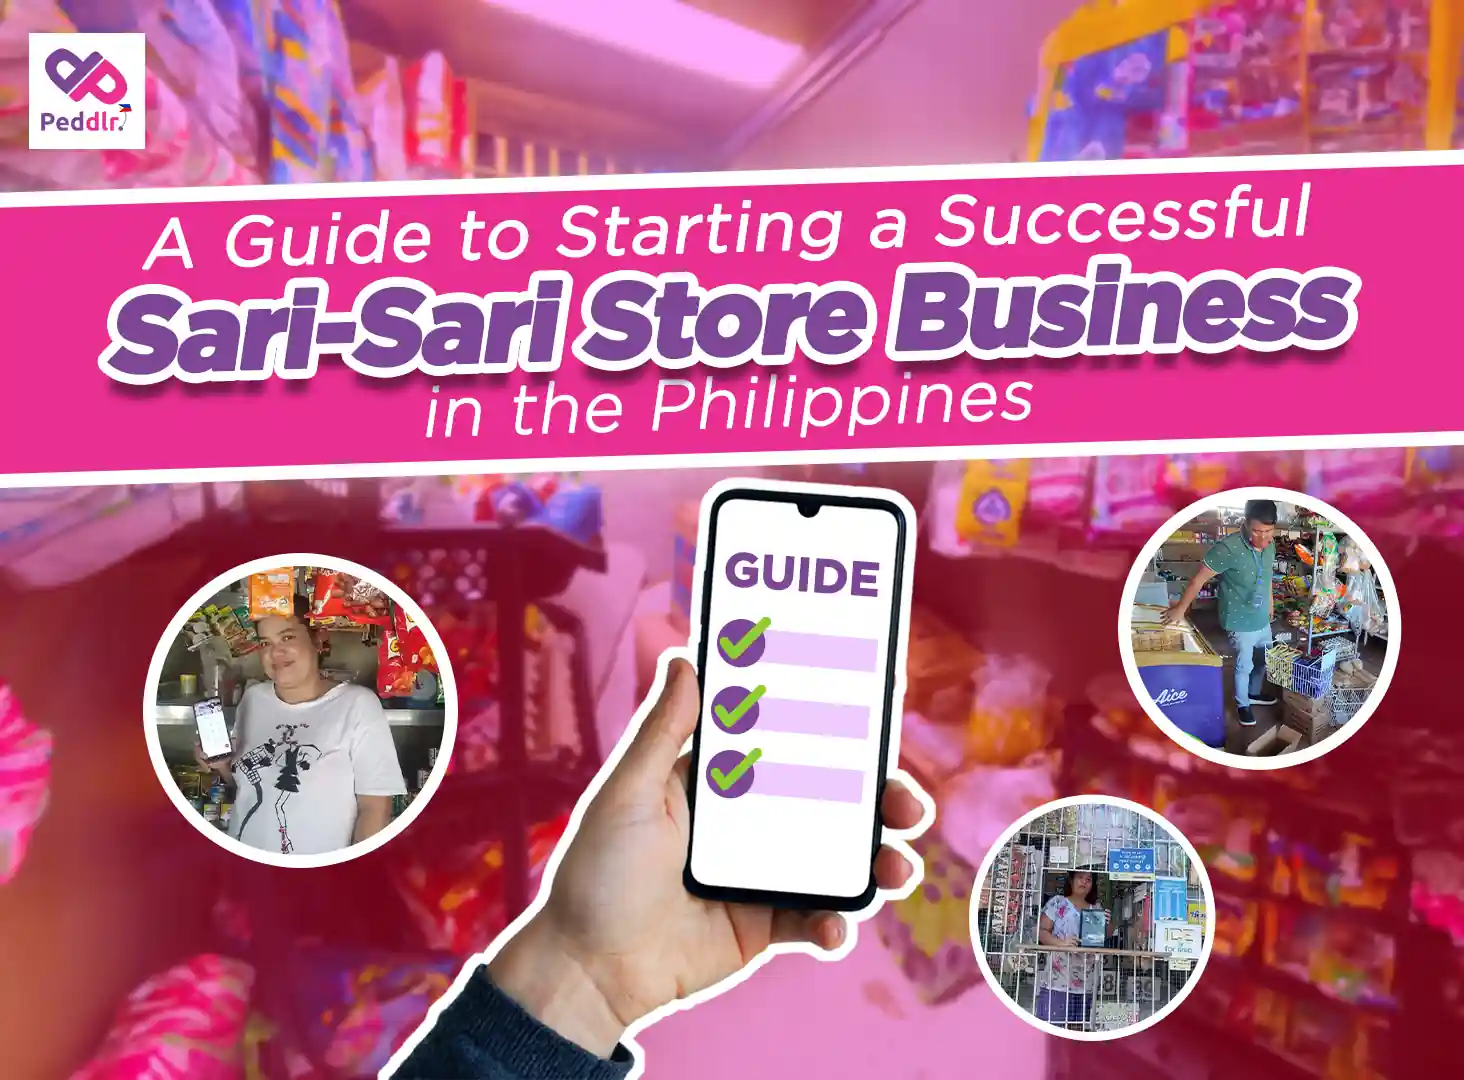 How To Start a Successful Sari-Sari Store Business in the Philippines